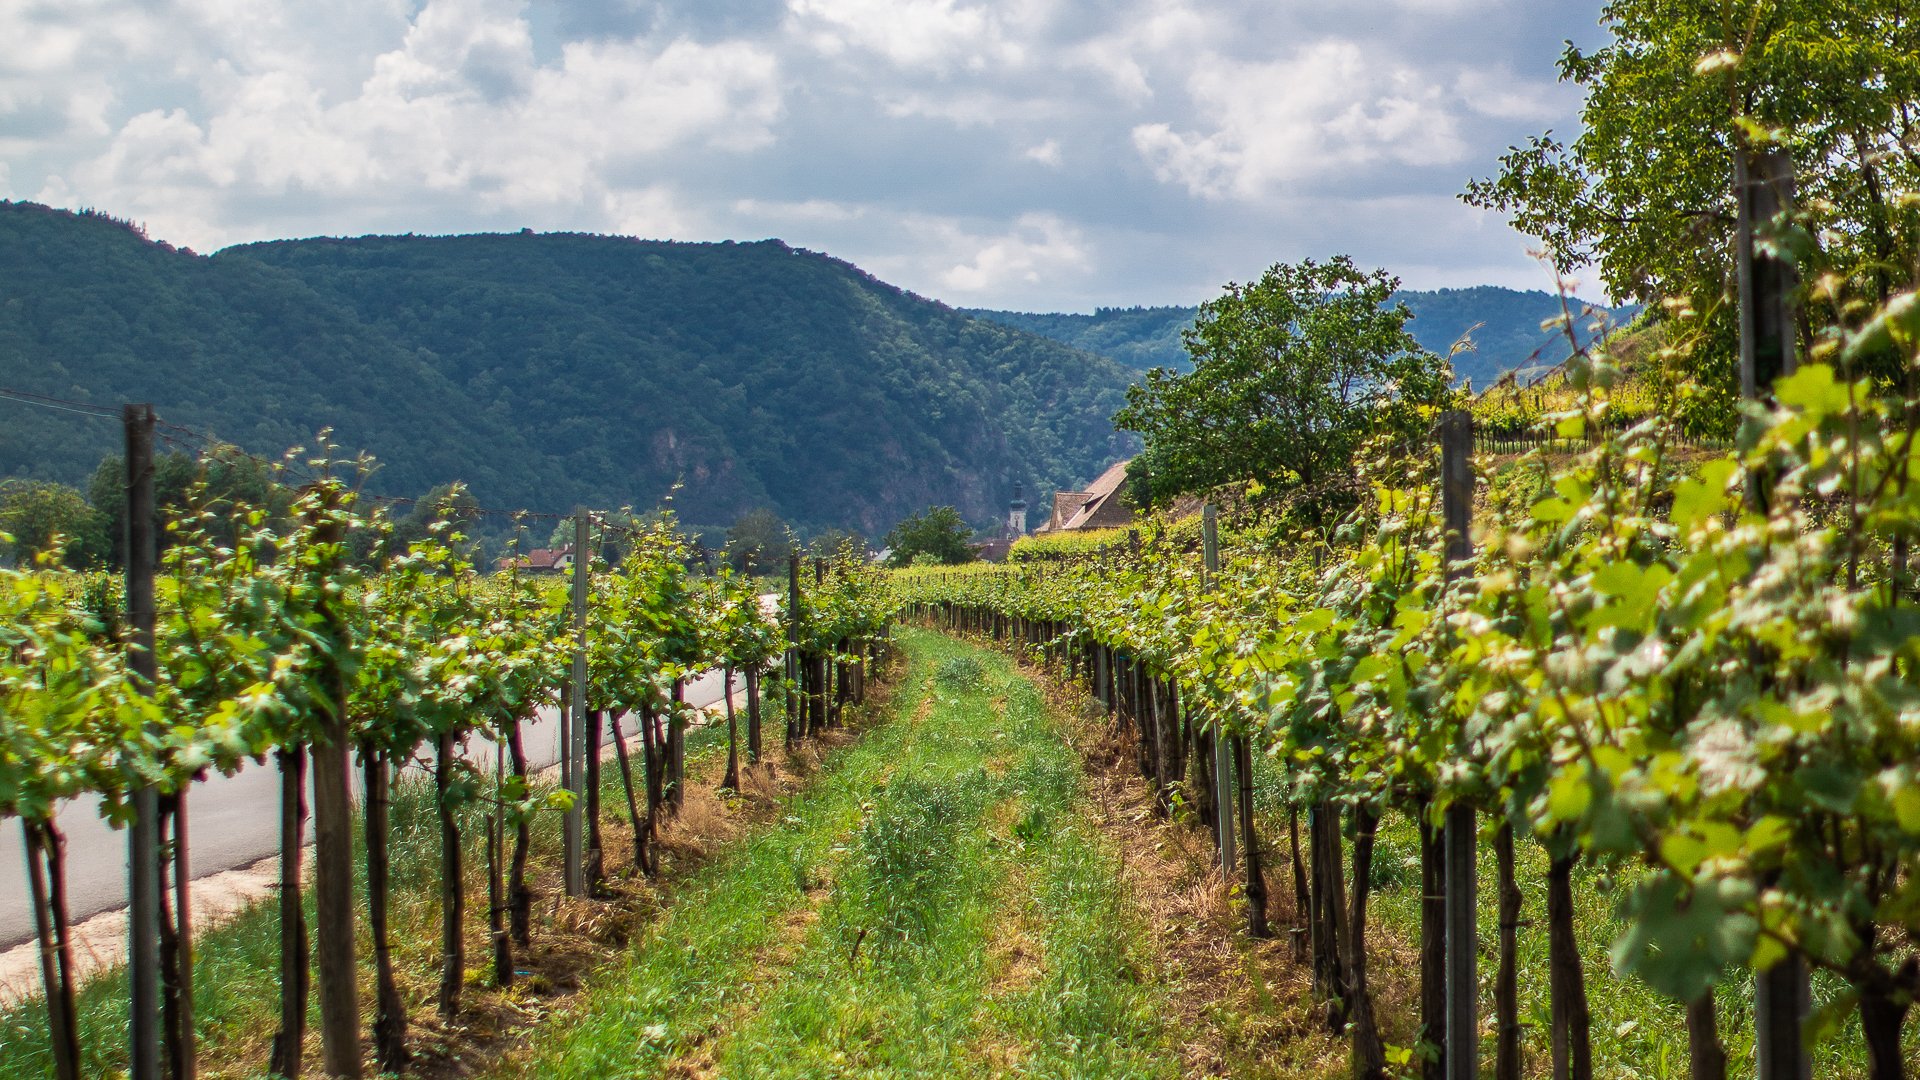 This image shows green vineyards by the road. 